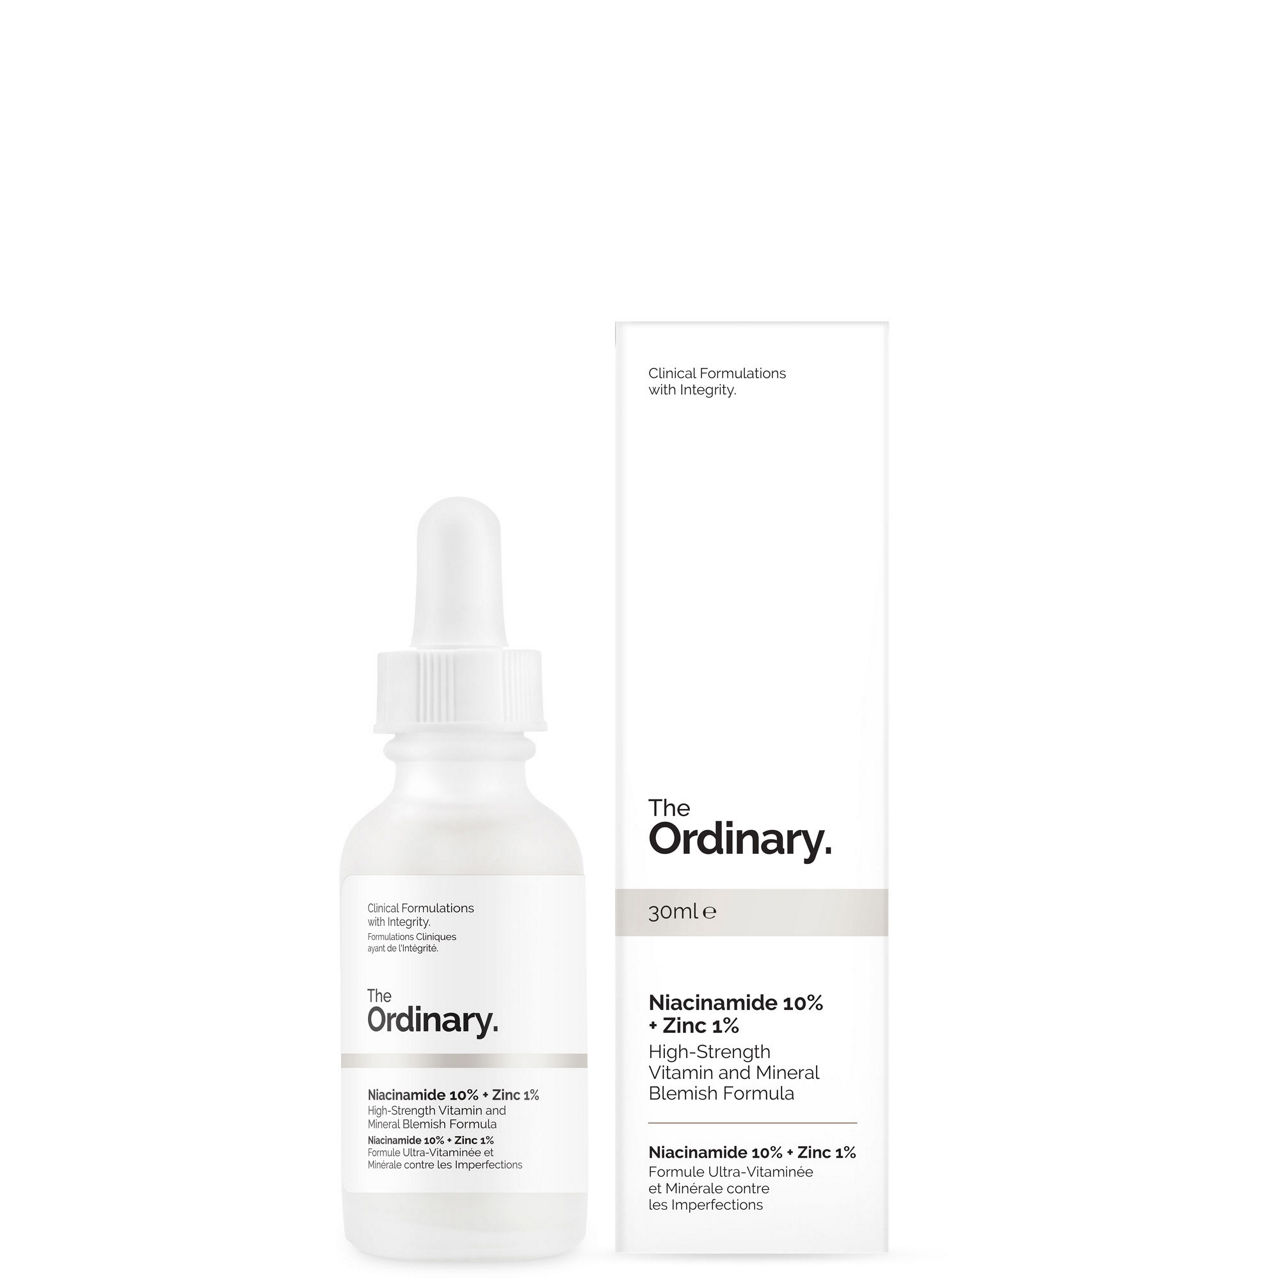 The Ordinary Hyaluronic + Glycolic Acid Duo at BEAUTY BAY